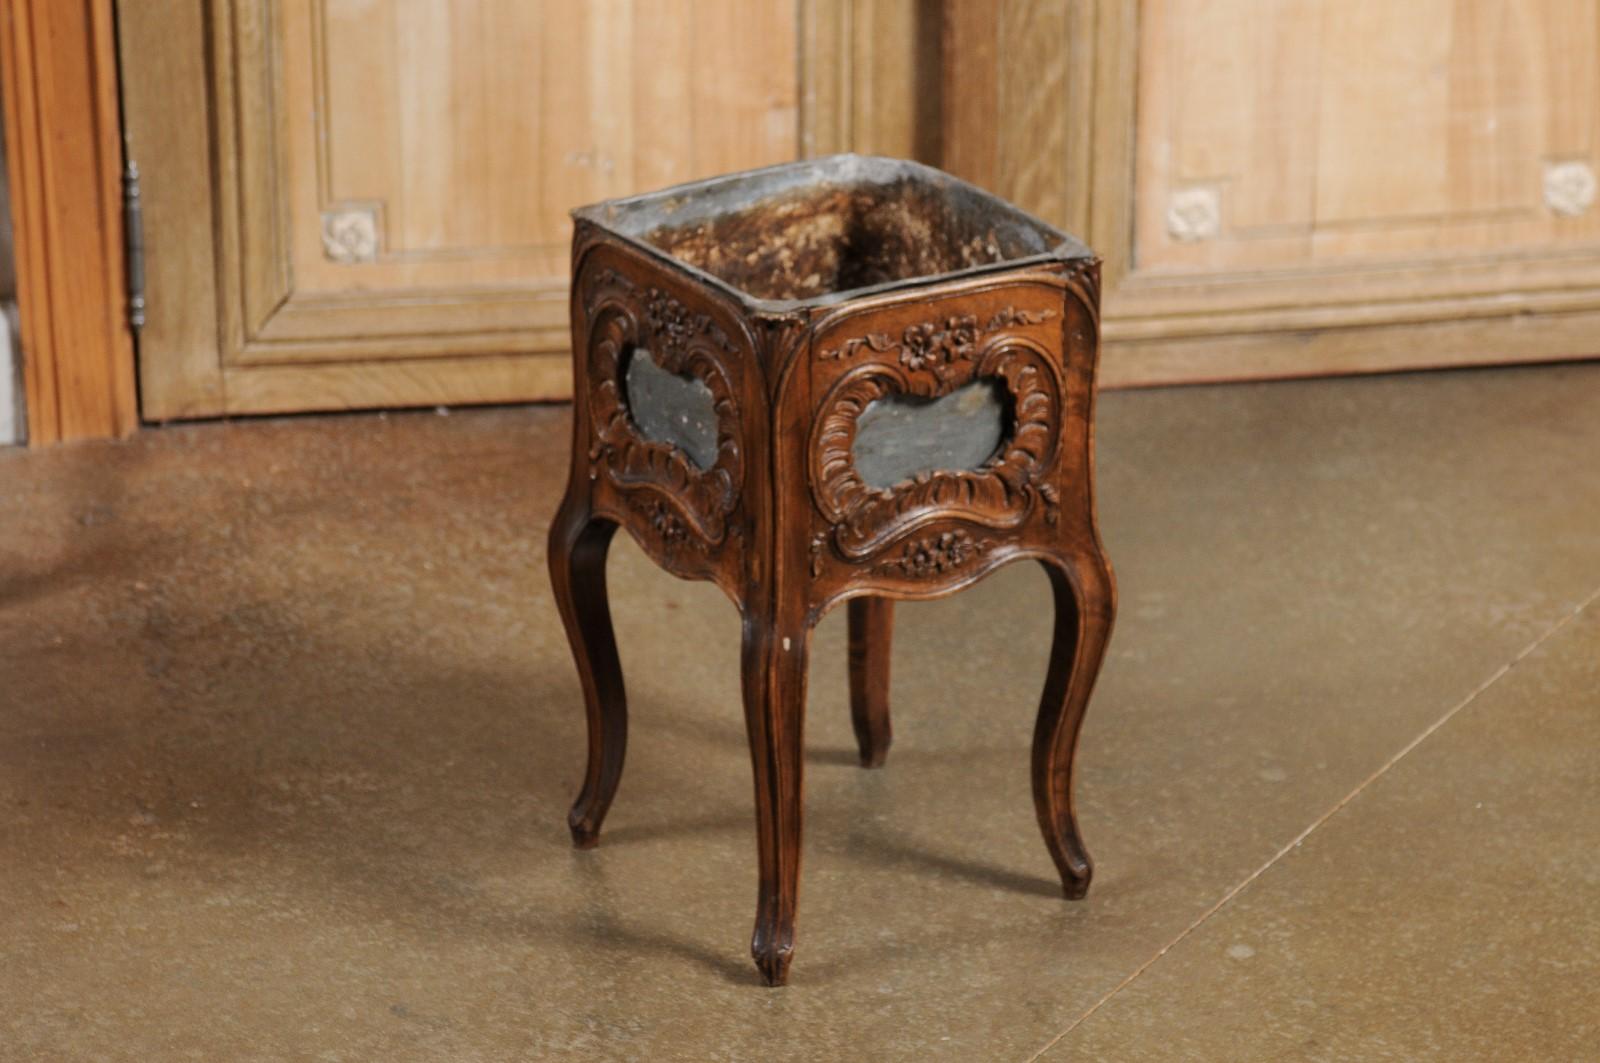 A French Rococo Revival period walnut planter from the late 19th century, with carved Rocailles motifs and tin liner. Created in France during the last quarter of the 19th century, this walnut planter features a square shaped body, carved with